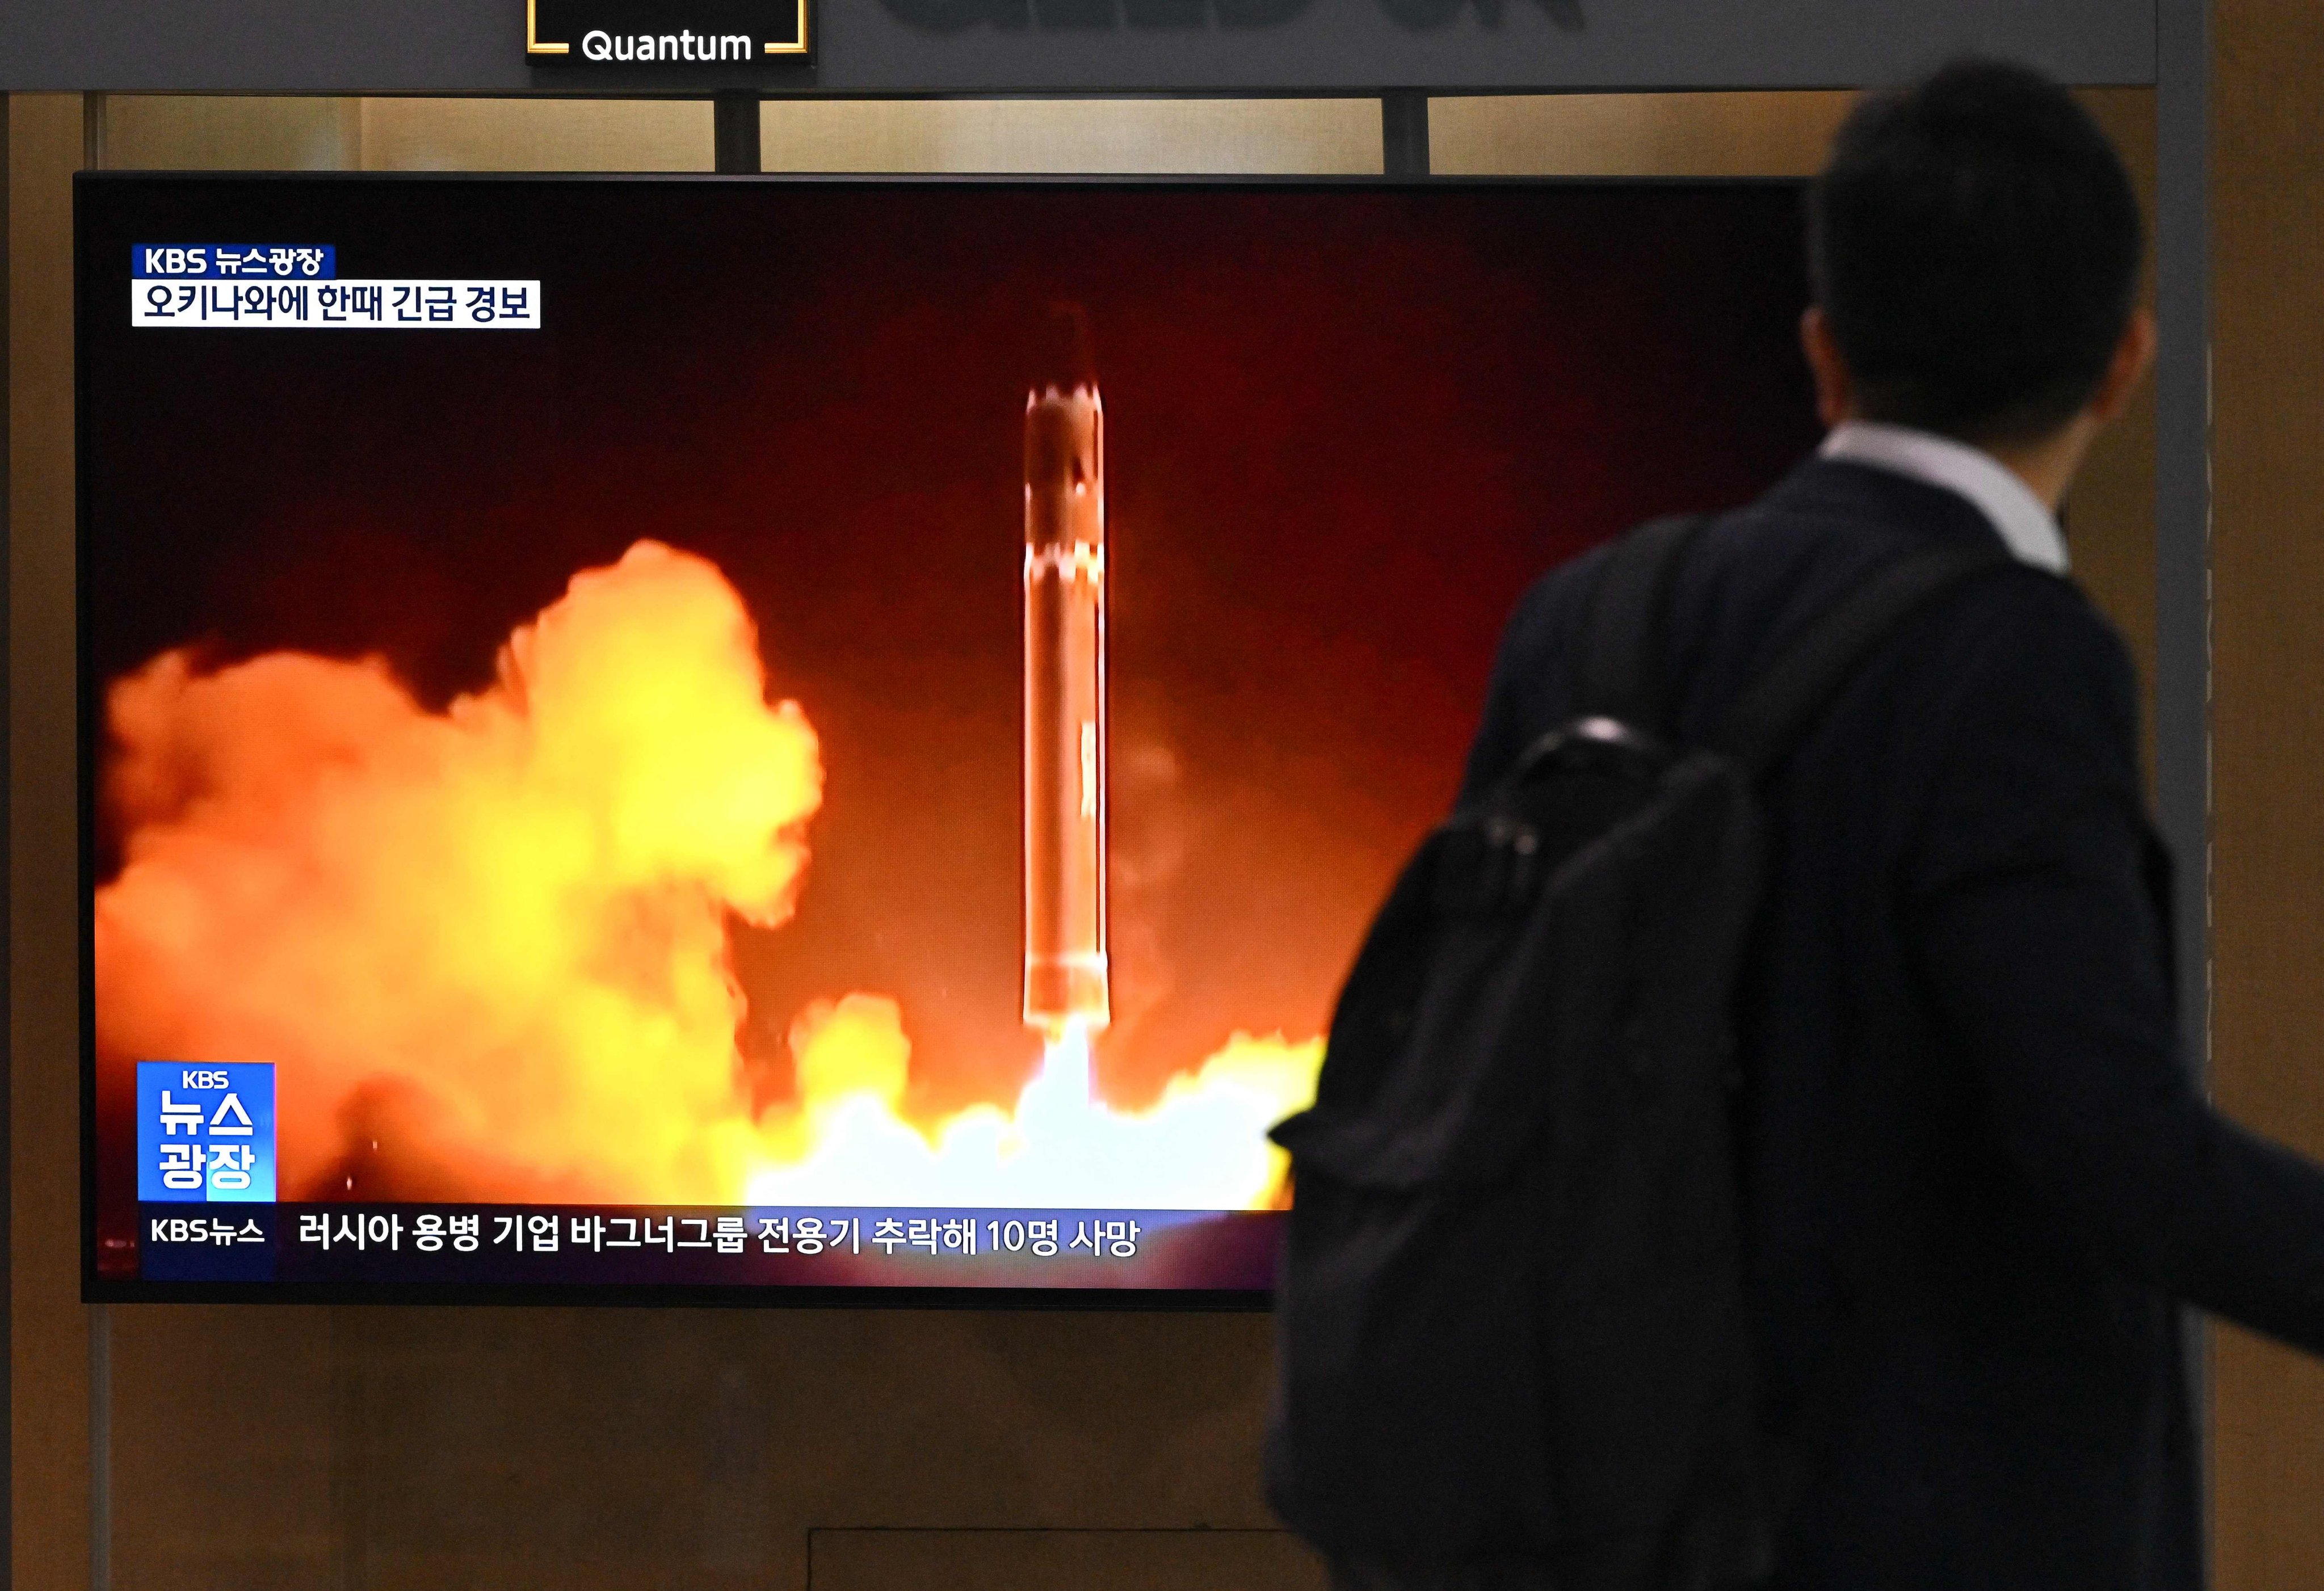 A man walks past a television screen showing a news broadcast with file footage of a North Korean missile test, at a train station in Seoul, South Korea on Thursday. Photo: AFP